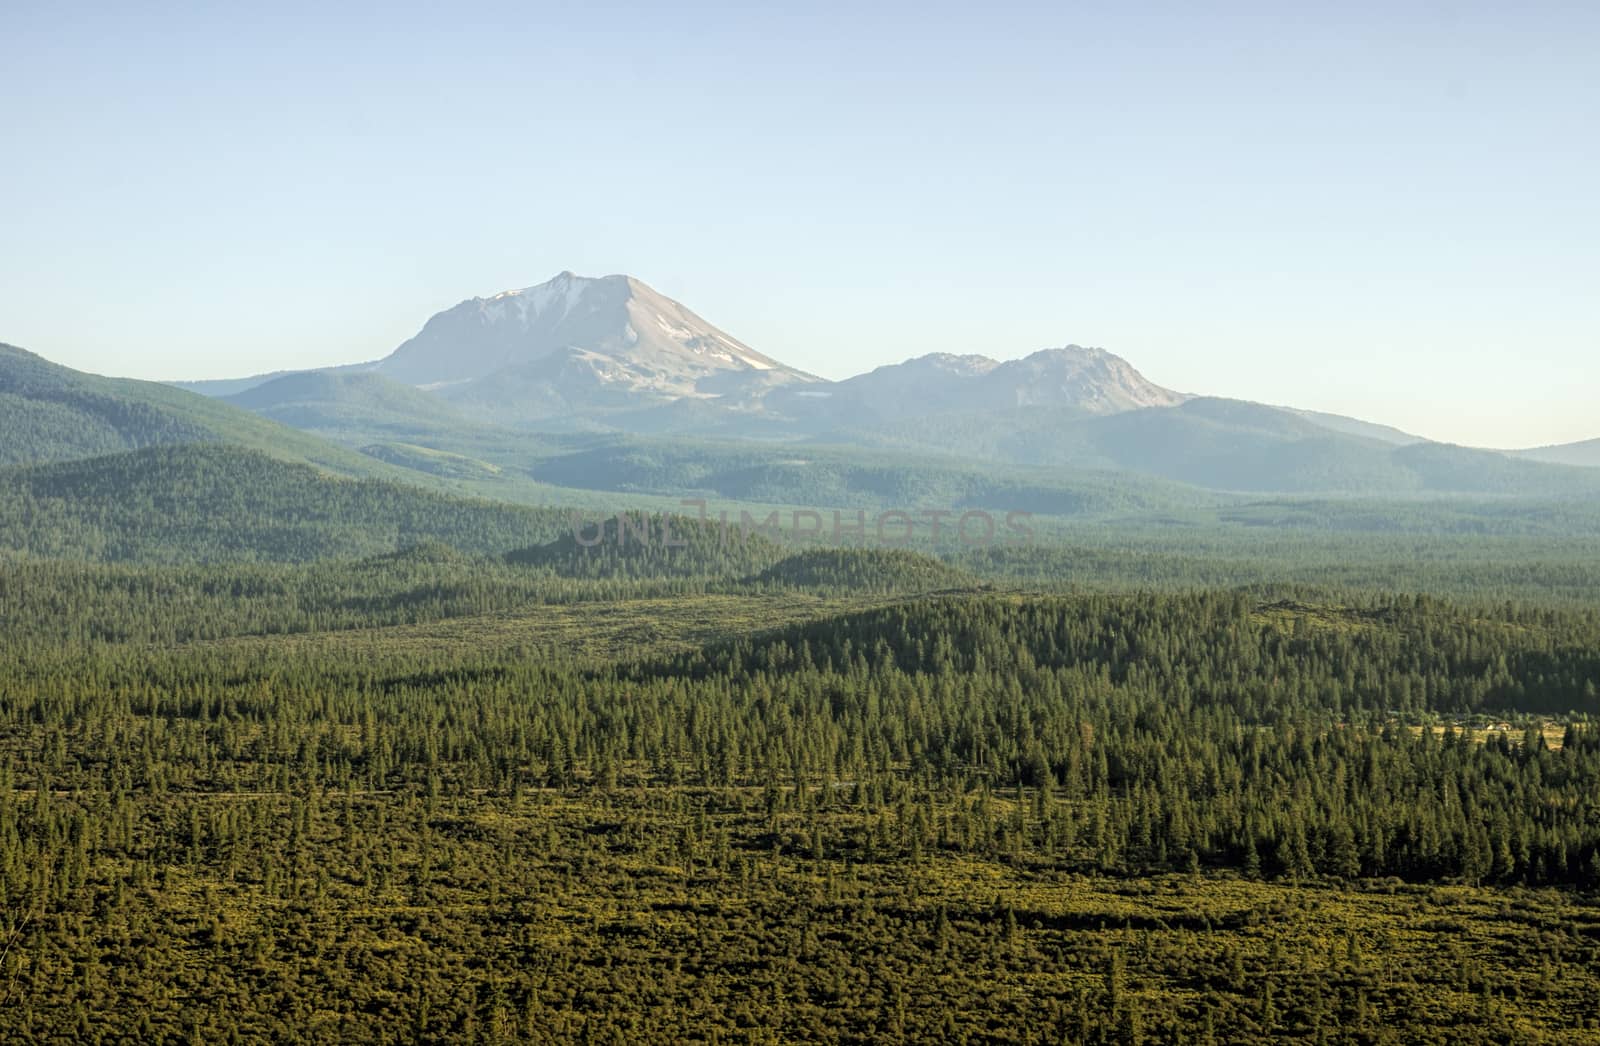 Mount Lassesn seen from the northeast side on a late afternoon in July. Mt. Lassen is a volcanic national park in Northern California.